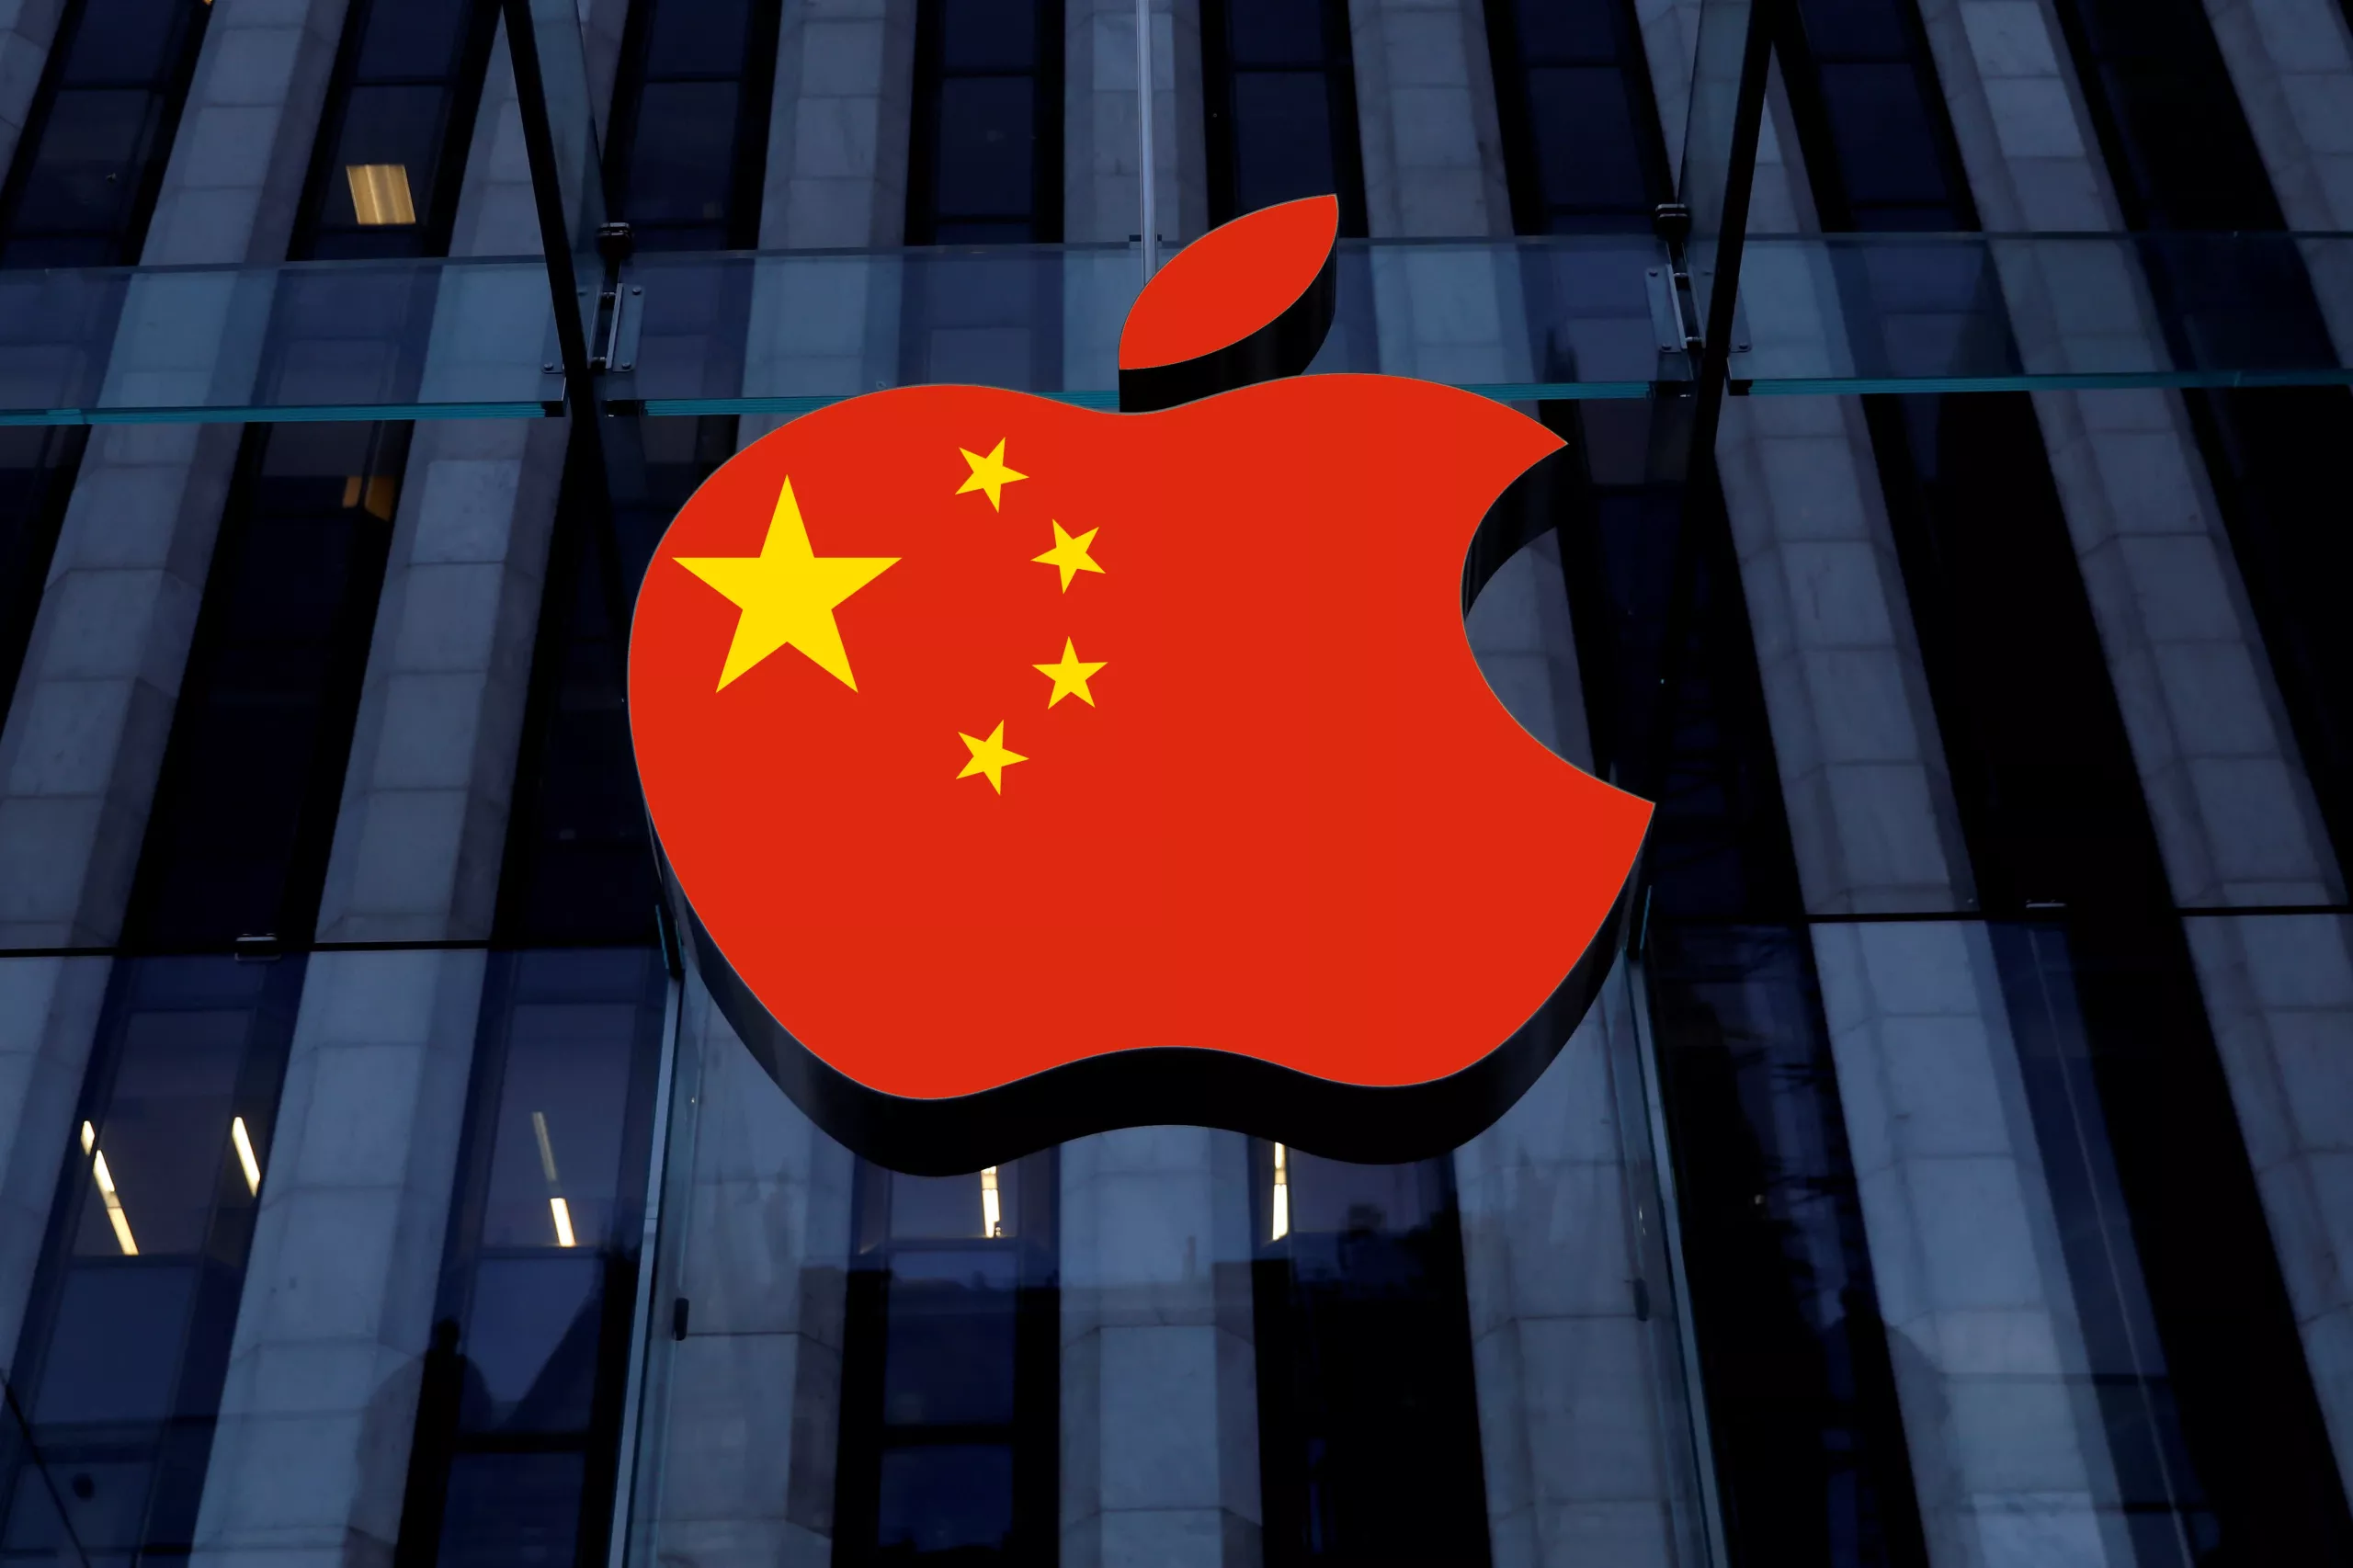 Tim Cook reportedly signed secret $275 billion investment deal with China to help Apple succeed in the country